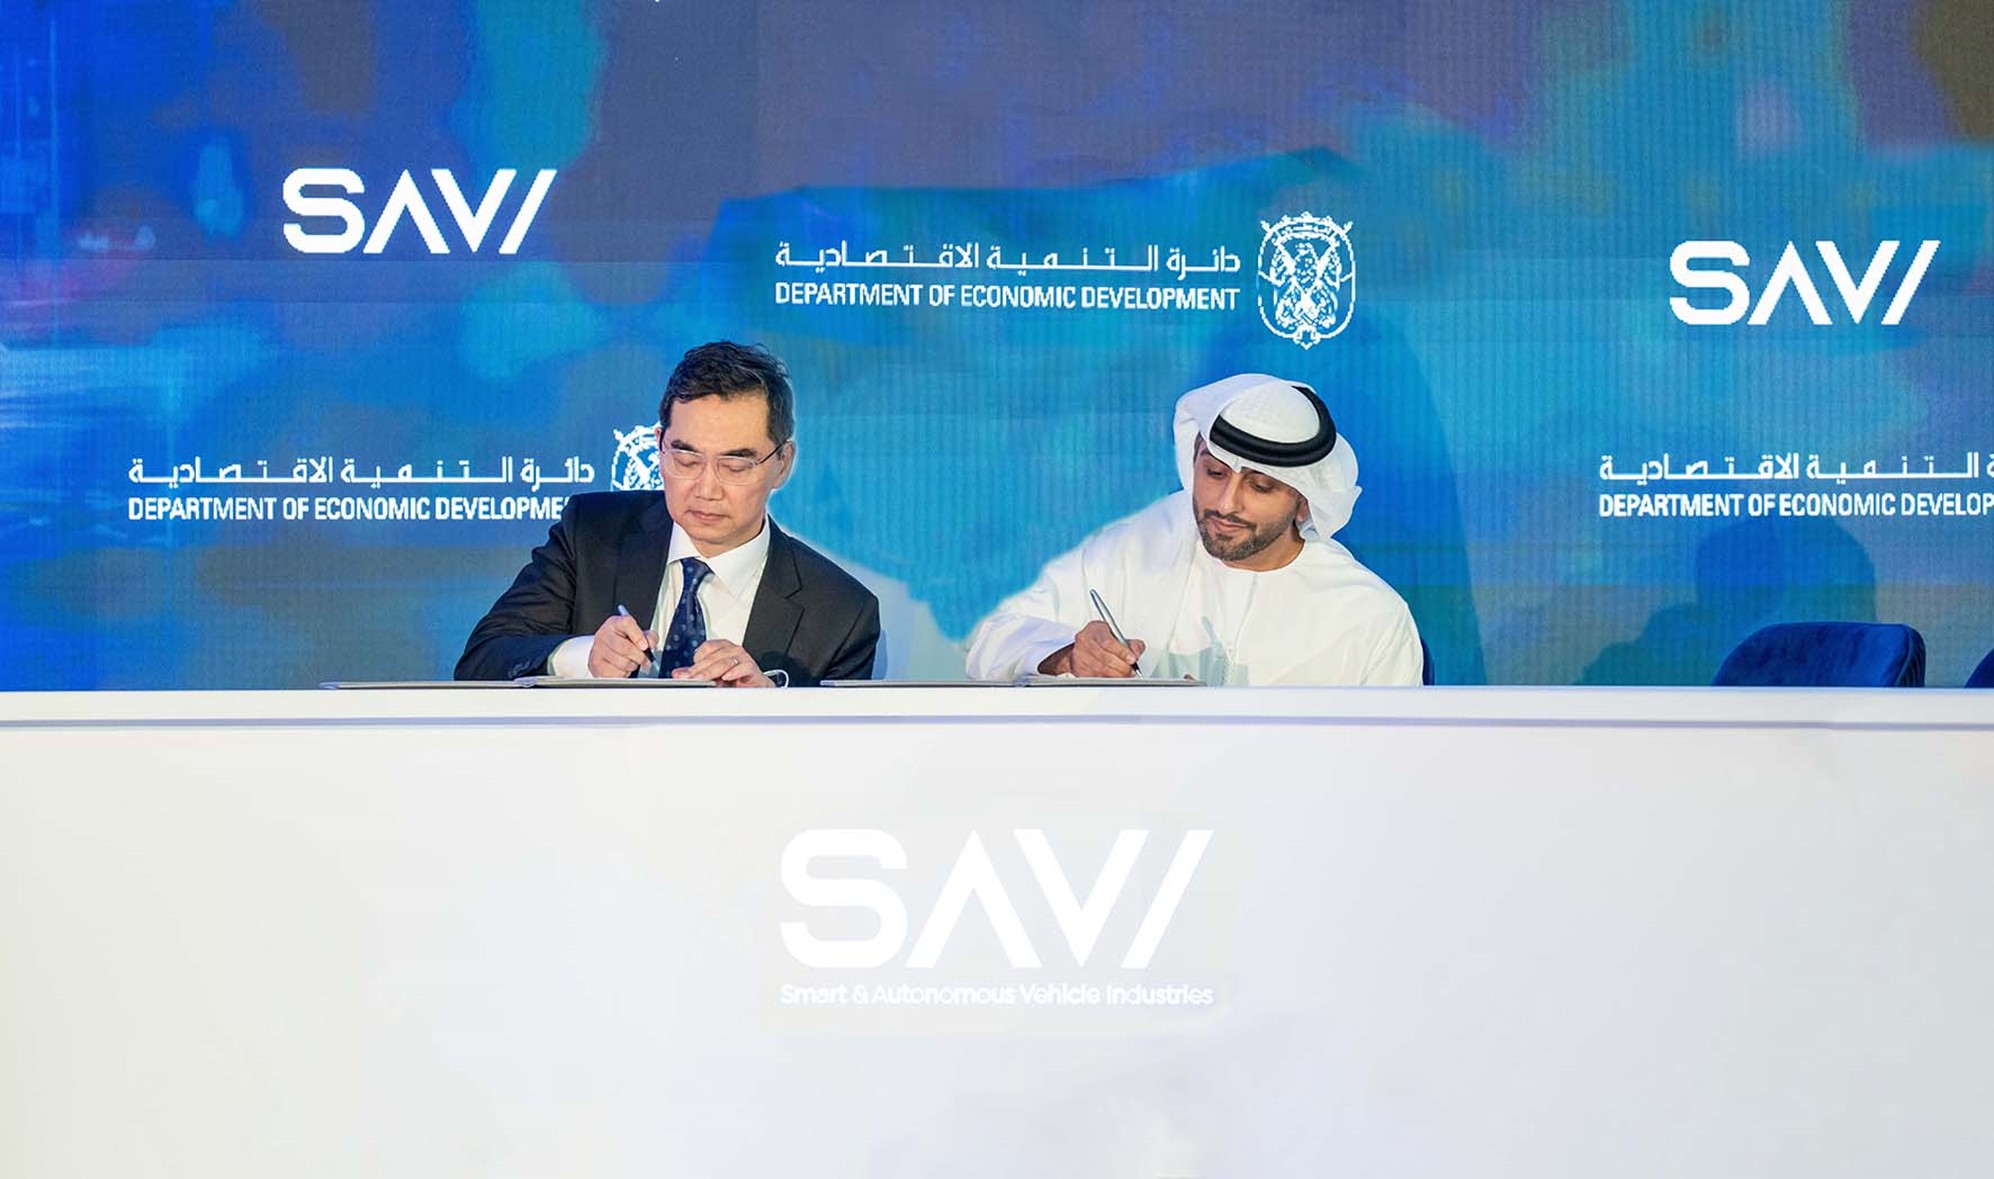 Mr. Mohamad Al Dhaheri, board member of Wings Logistics Hub (right), and Mr. Conor Chia-hung Yang, CFO of EHang (left), at the signing ceremony to announce the strategic partnership between two companies.